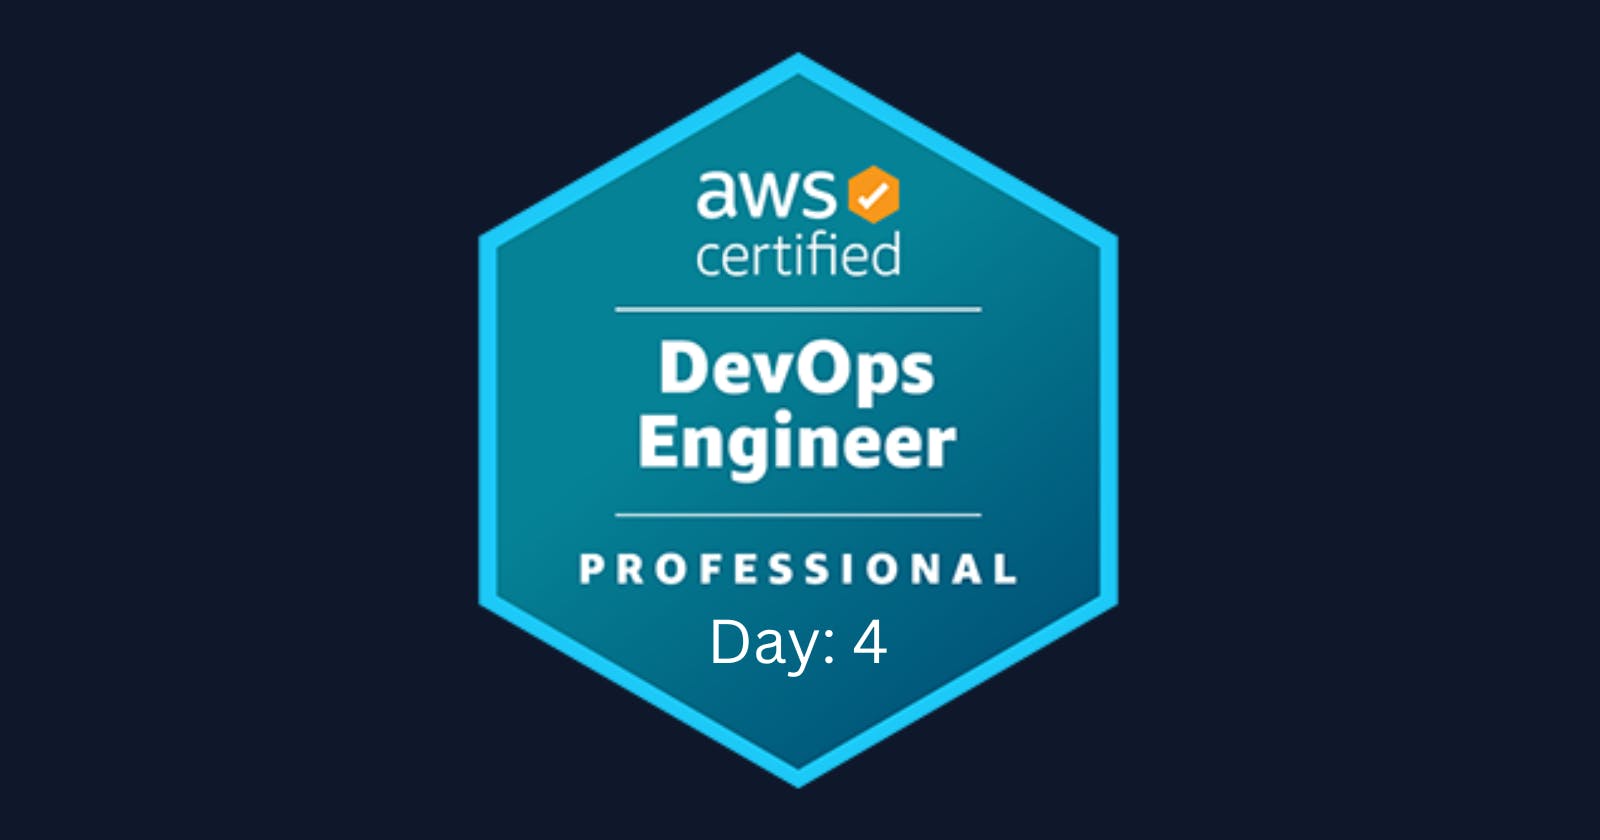 🚀 Exciting Day 4 of My AWS DevOps Engineer Professional Journey! 🚀